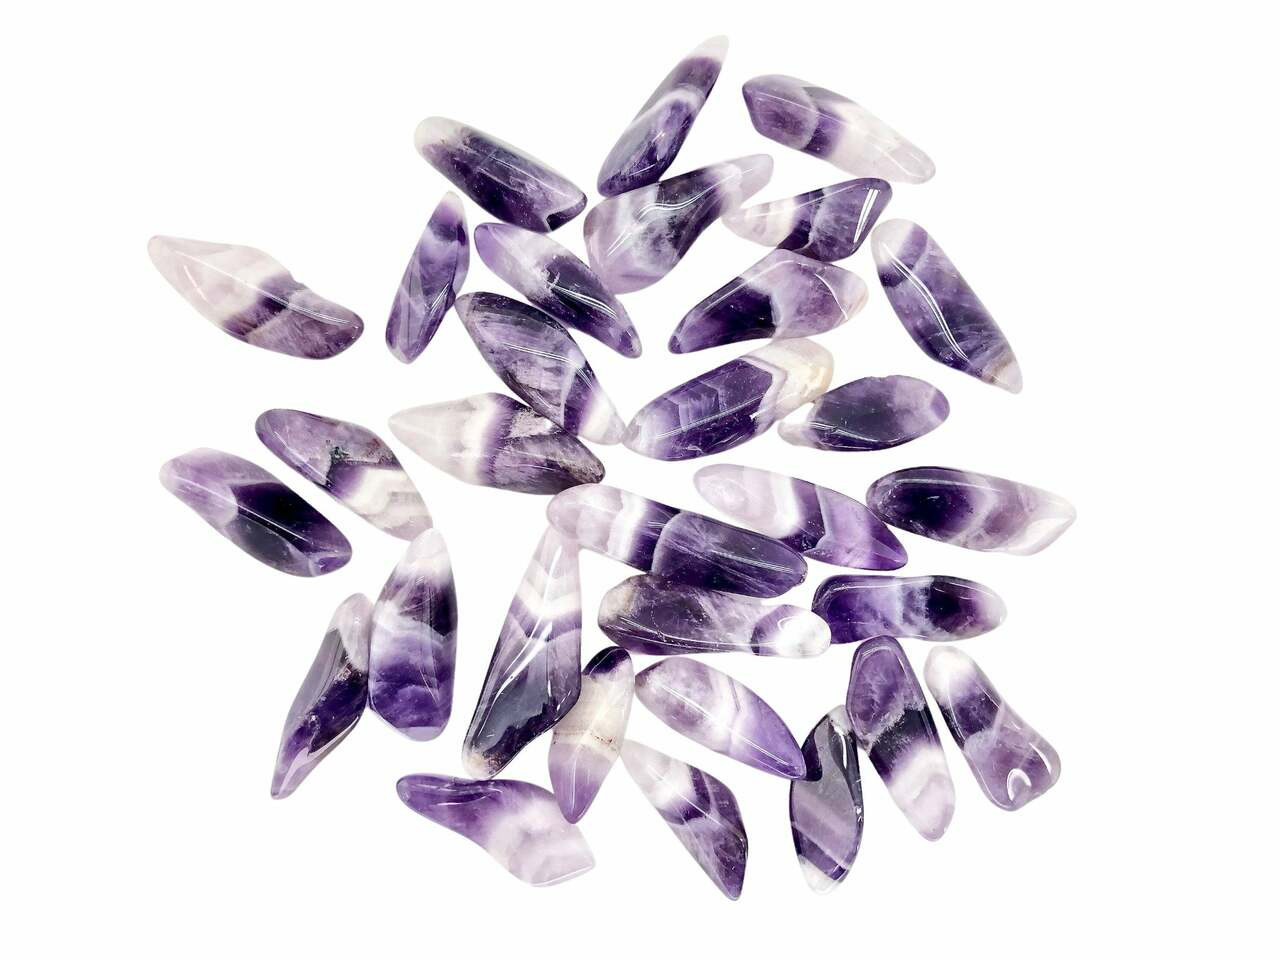 Details about   Amethyst Chevron Tumbled Dogtooth Stones South Africa 50 grams